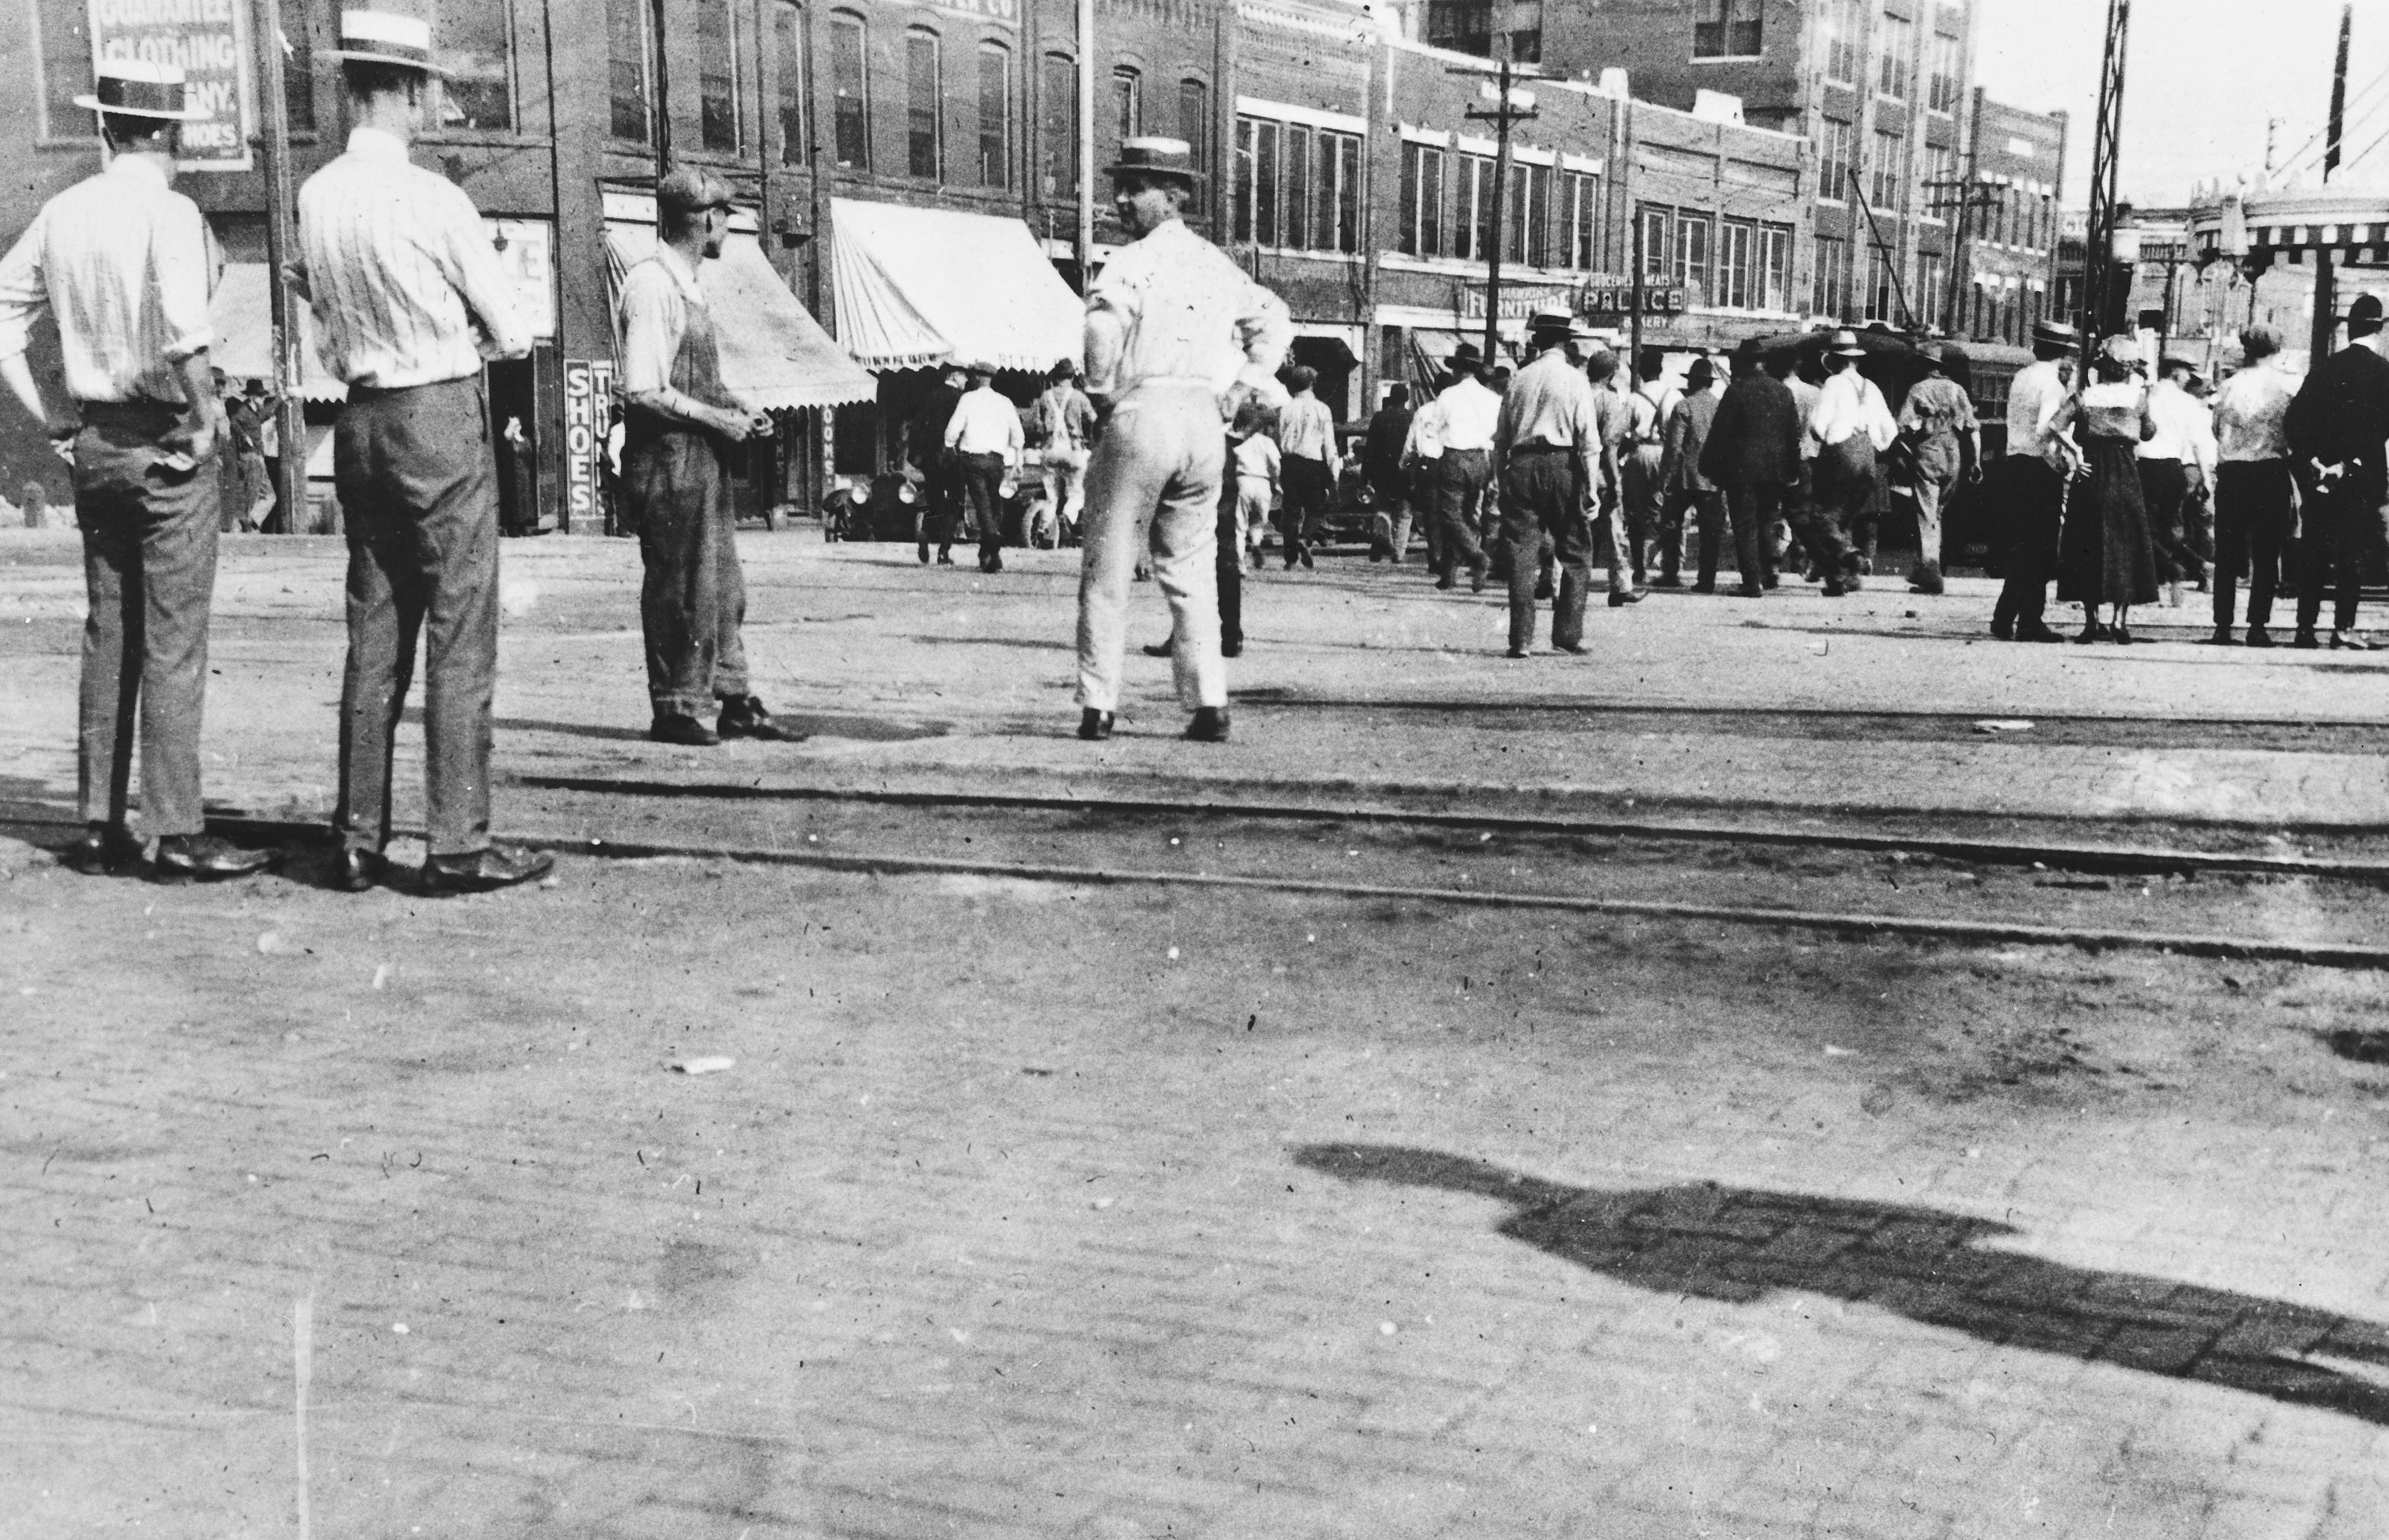 People stand in the street during the Tulsa race massacre.